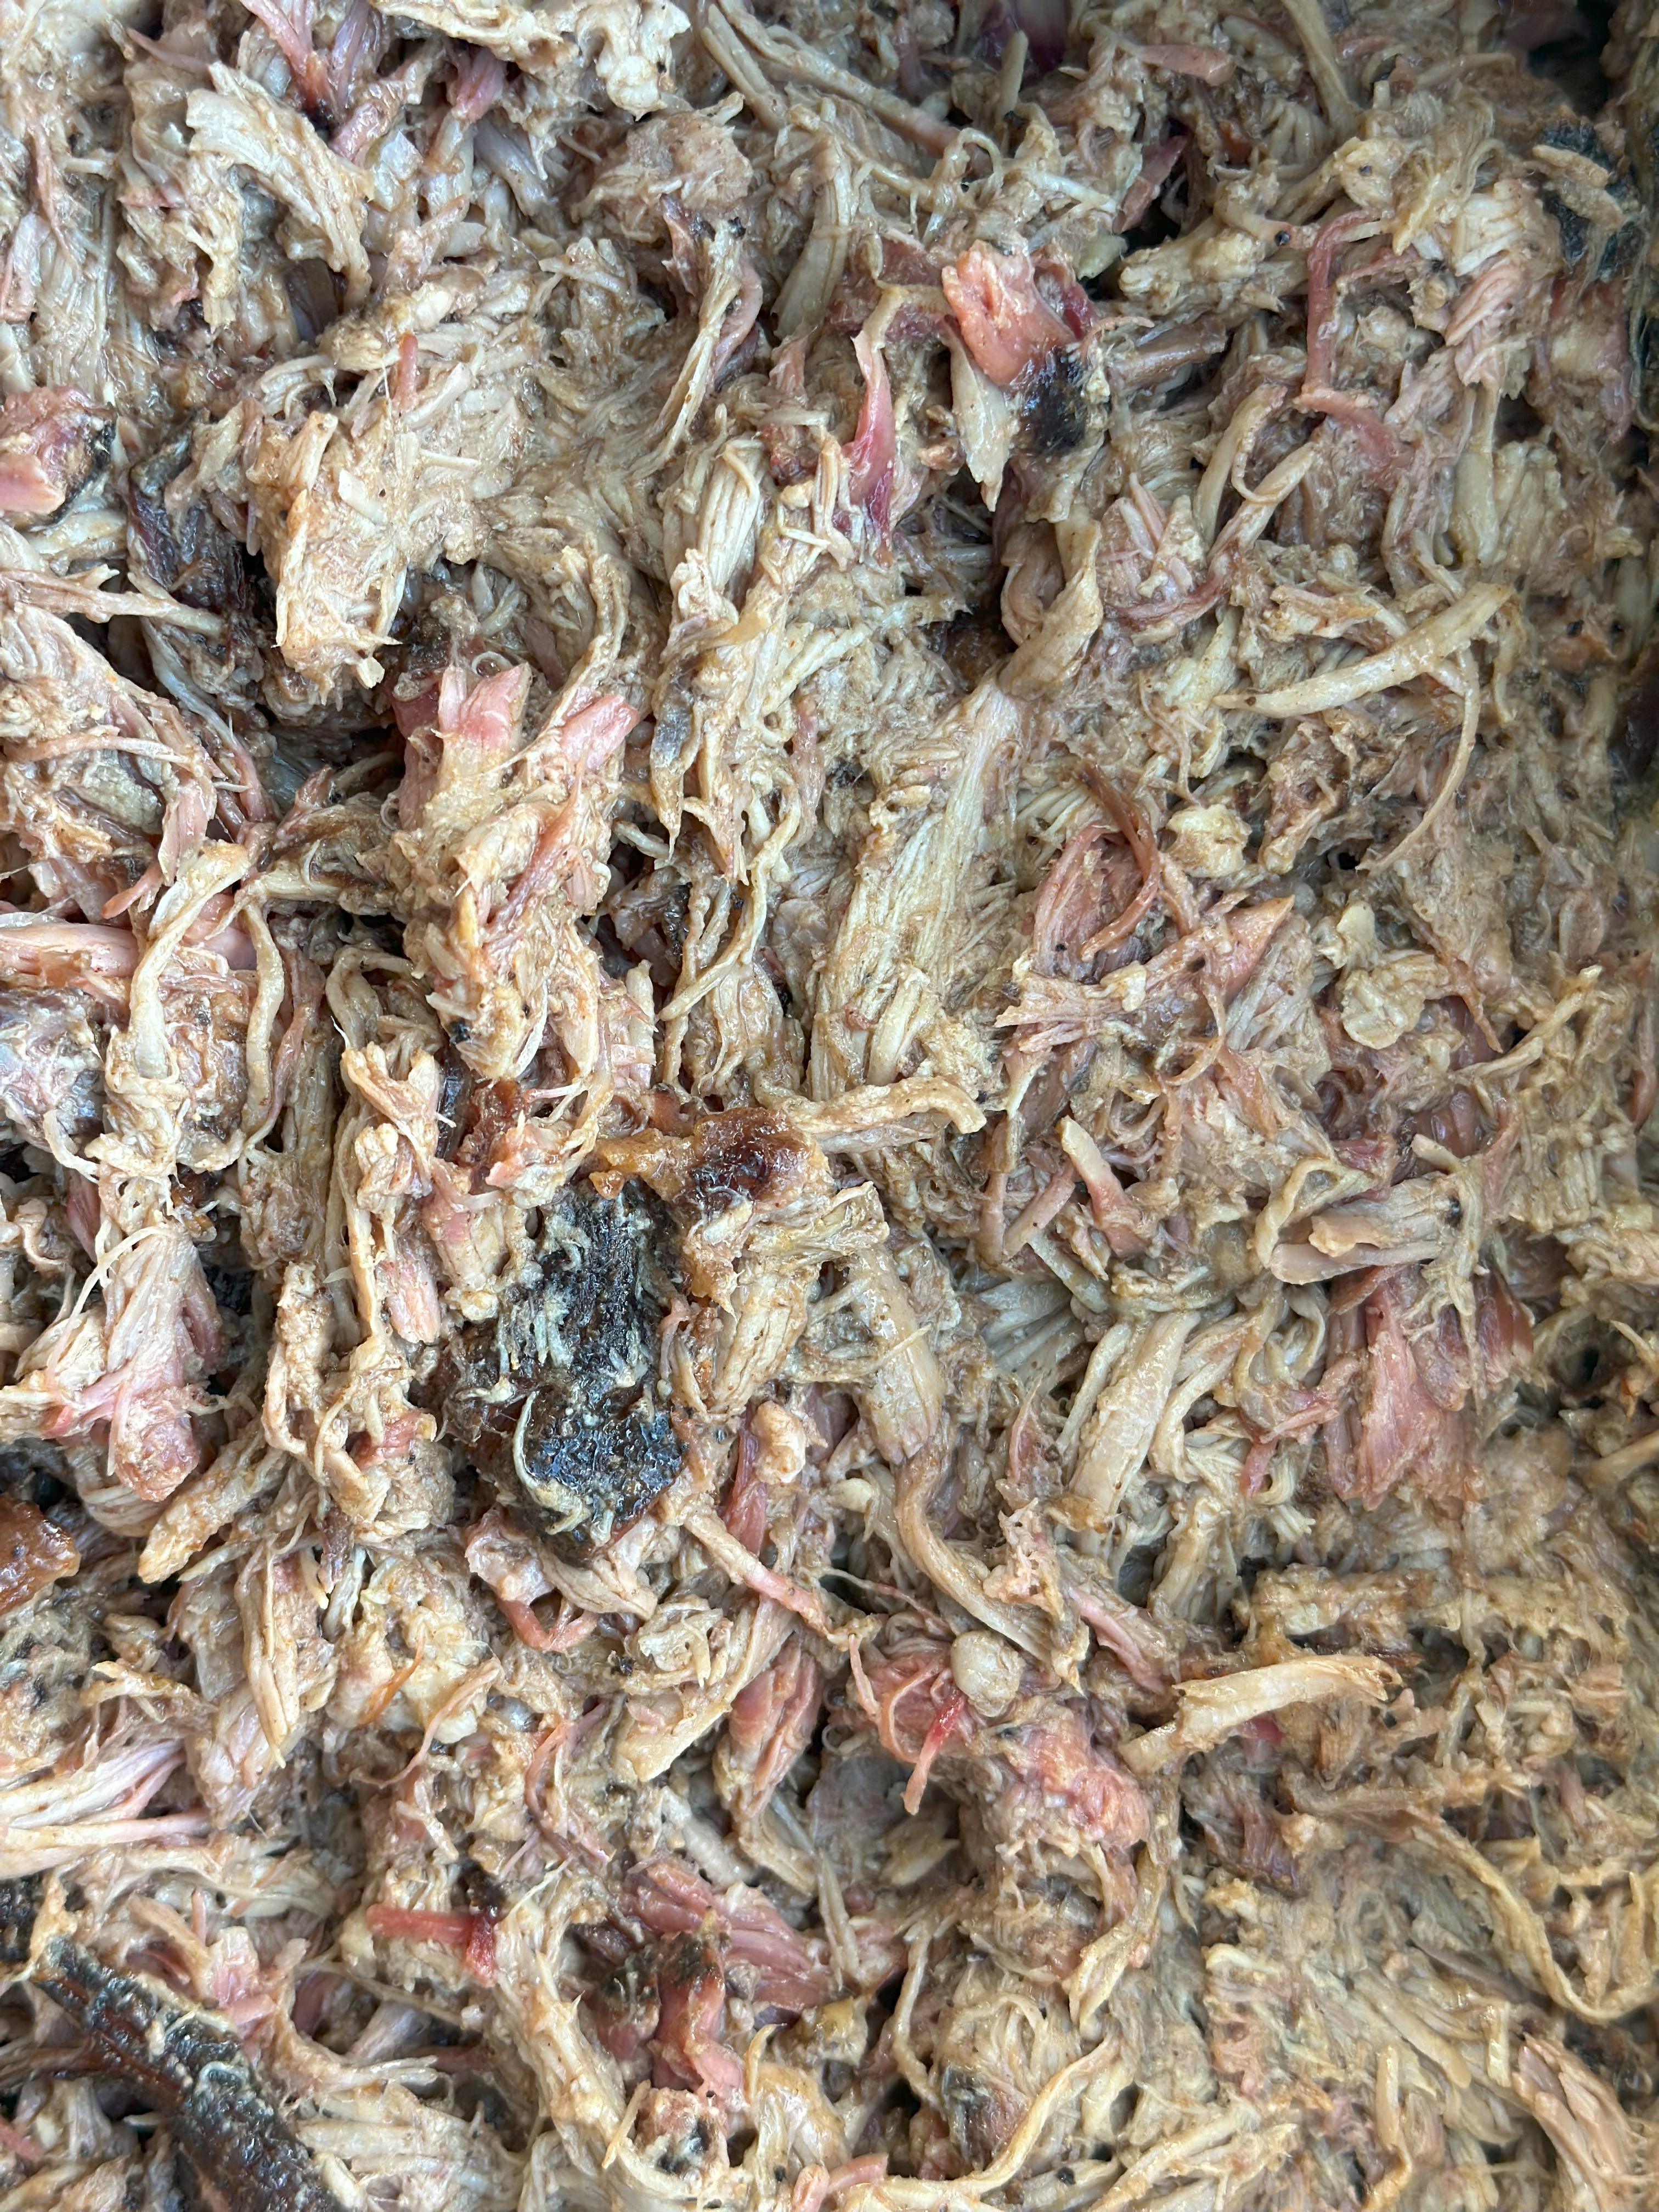 Image of DDP-PB, that's Dr. Pepper Pulled Pork Y'all